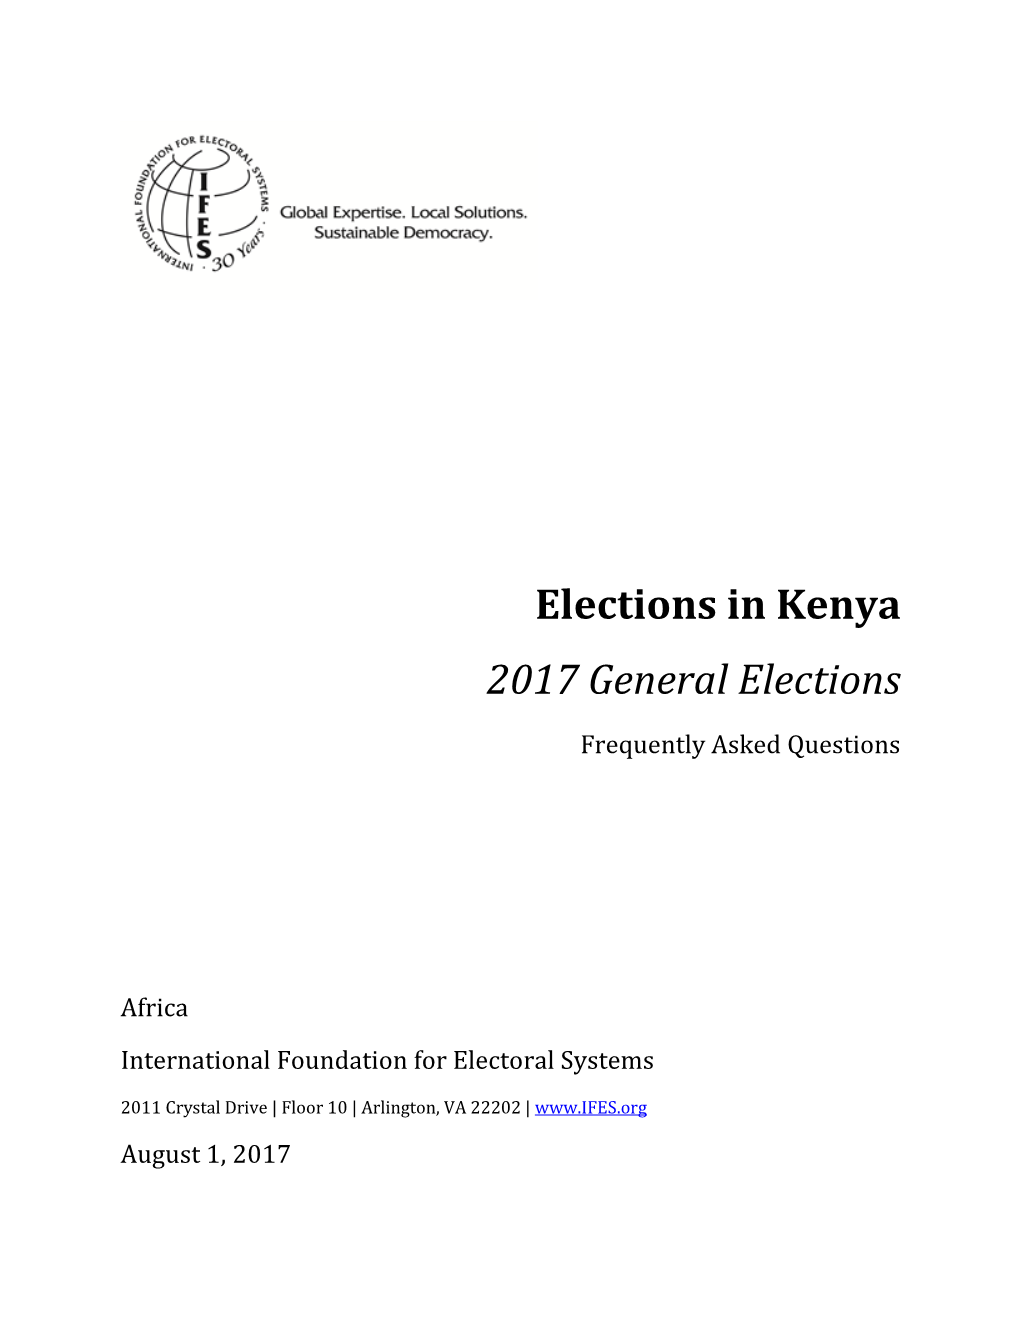 Elections in Kenya: 2017 General Elections Frequently Asked Questions